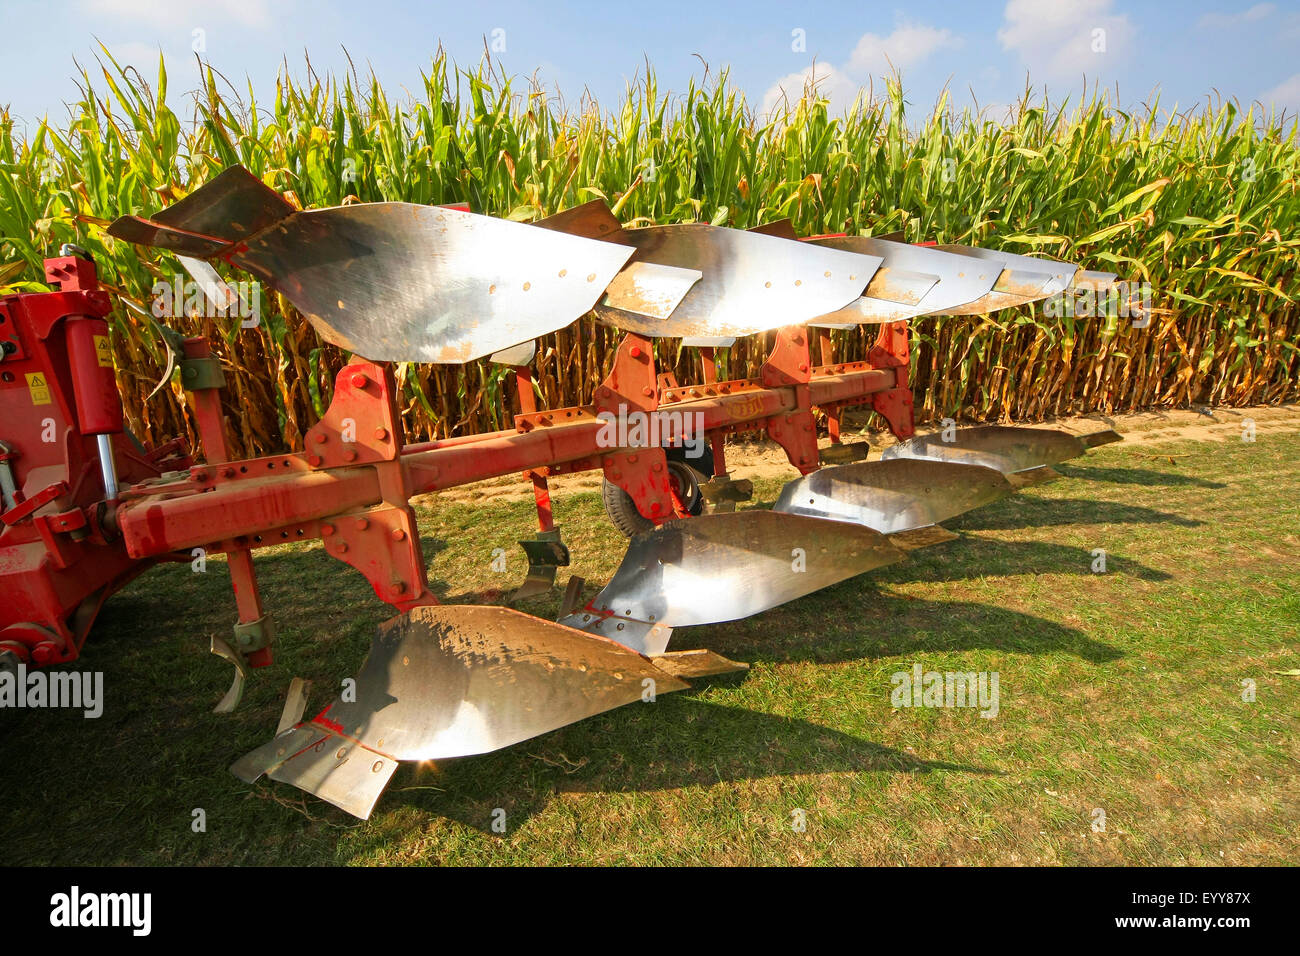 plough at a tractor, Netherlands Stock Photo